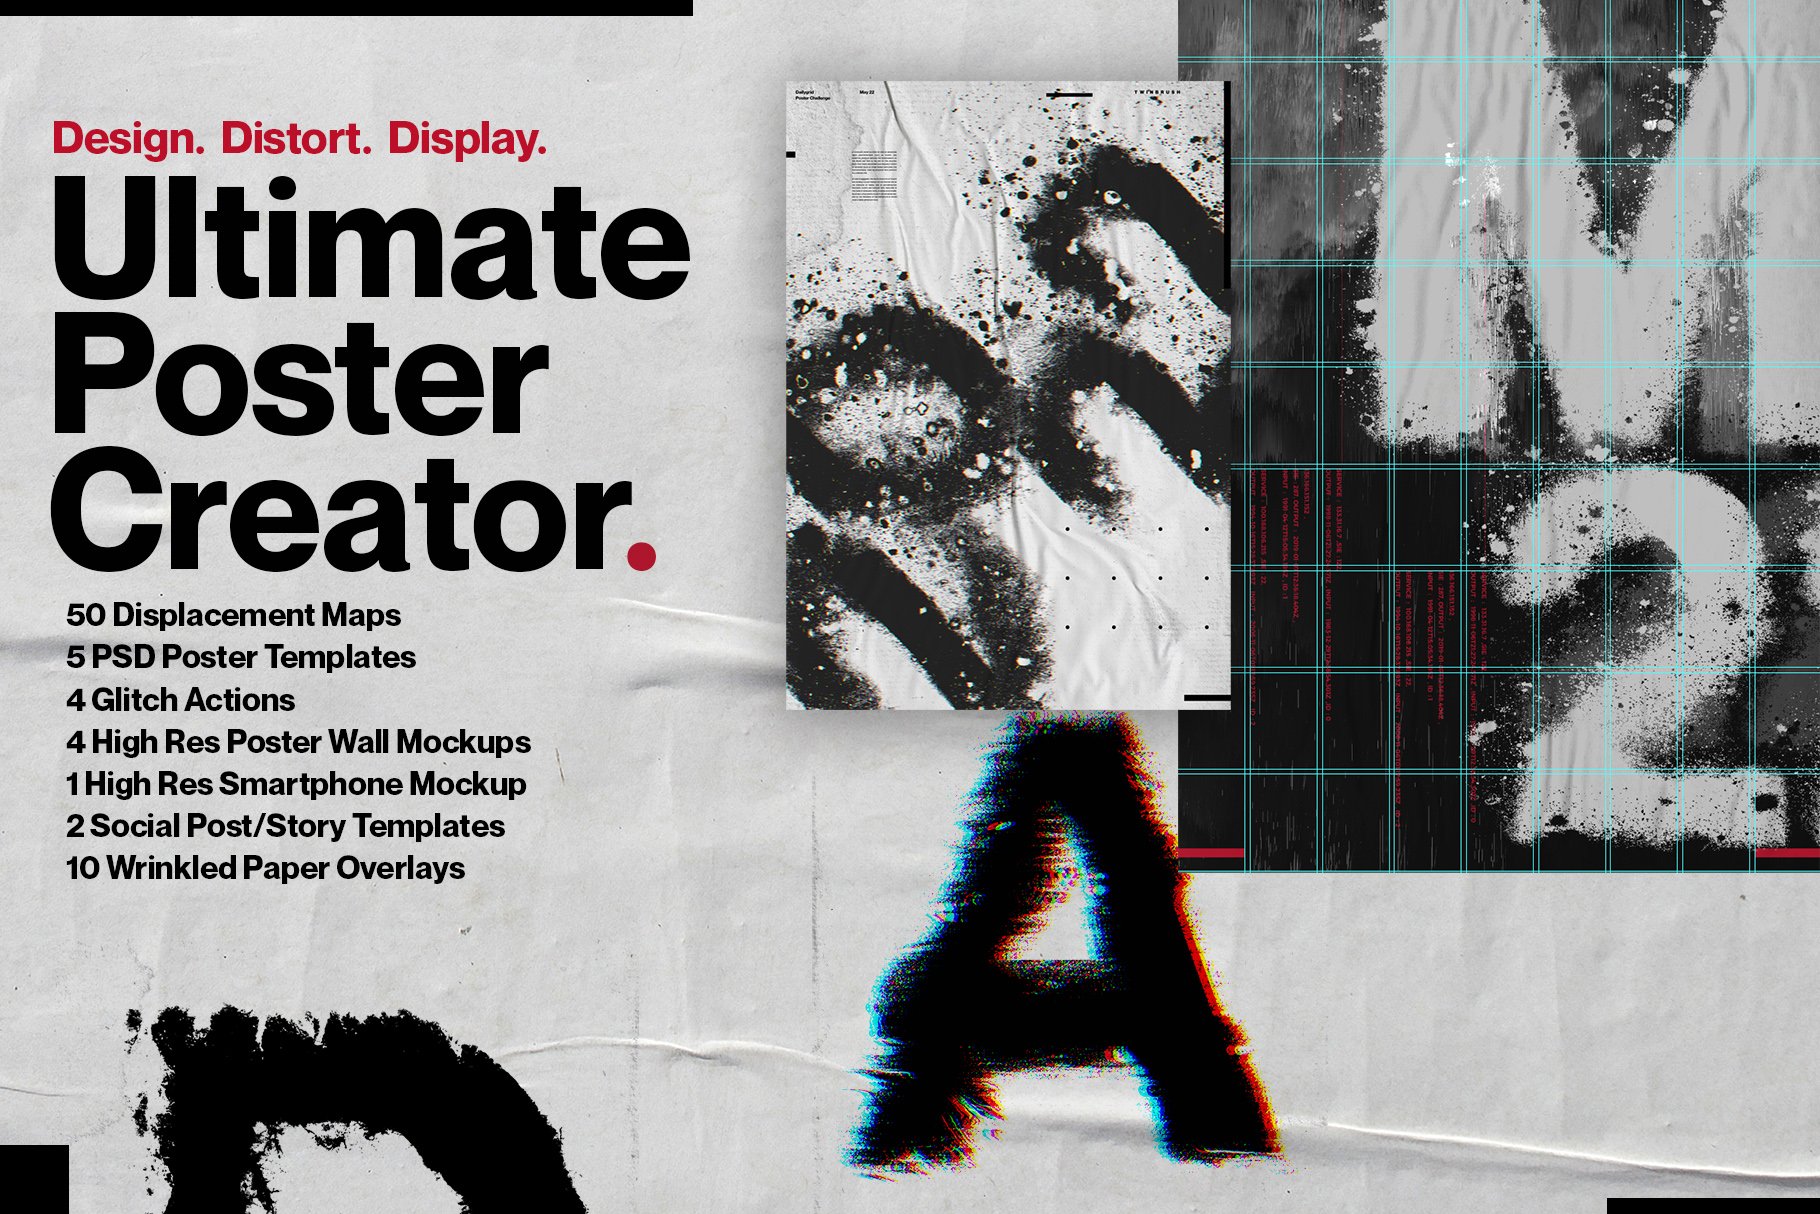 Ultimate Distortion Poster Creatorcover image.